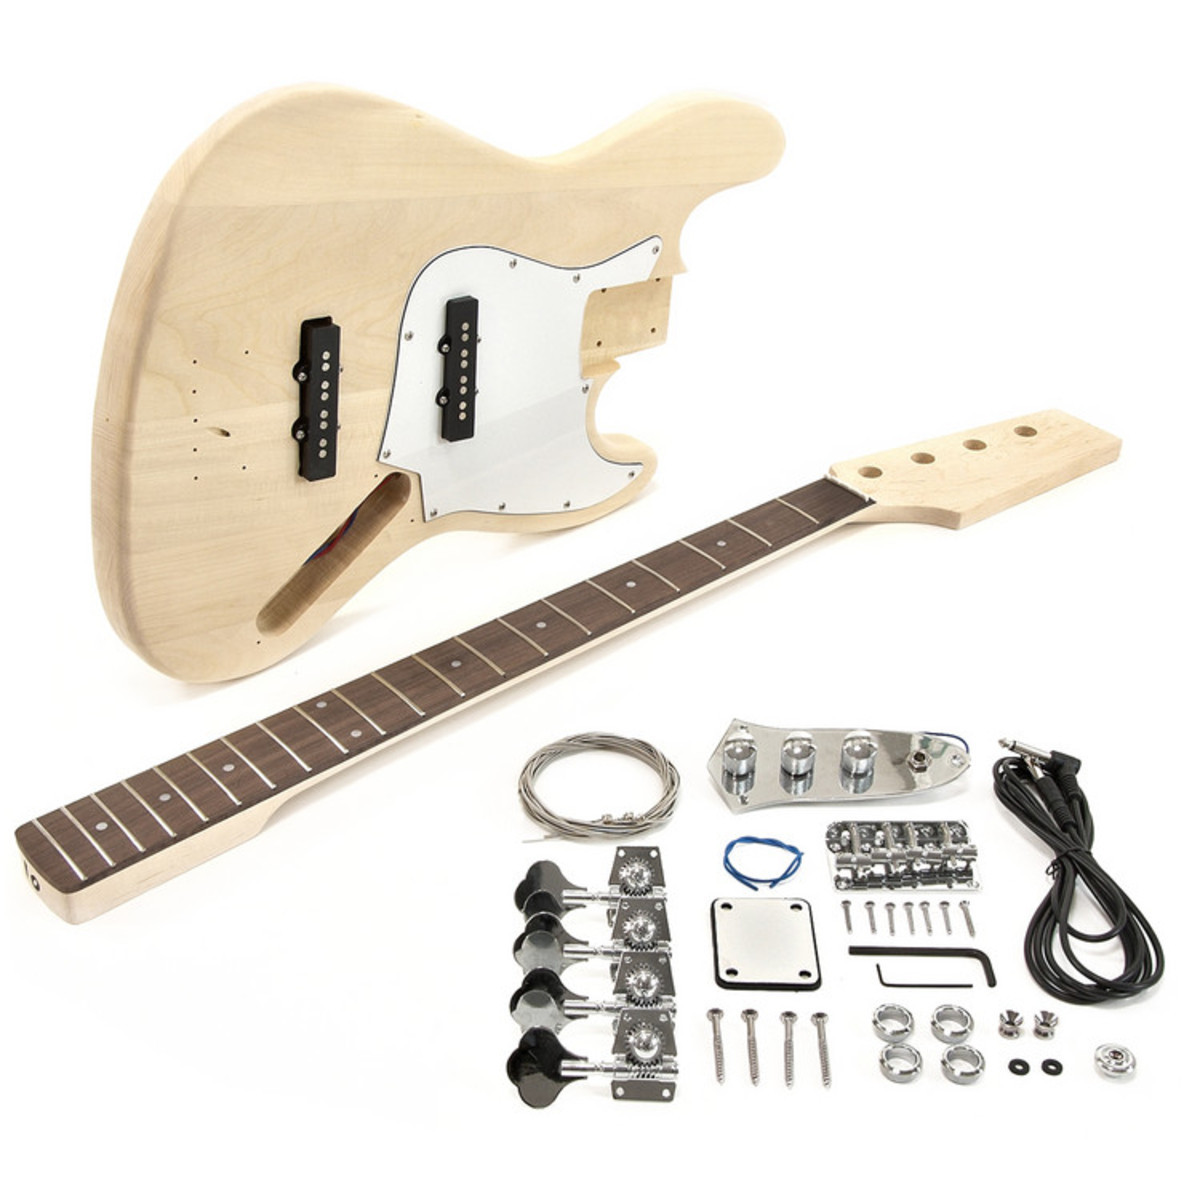 Best ideas about DIY Bass Kit
. Save or Pin LA J Electric Bass Guitar DIY Kit at Gear4music Now.